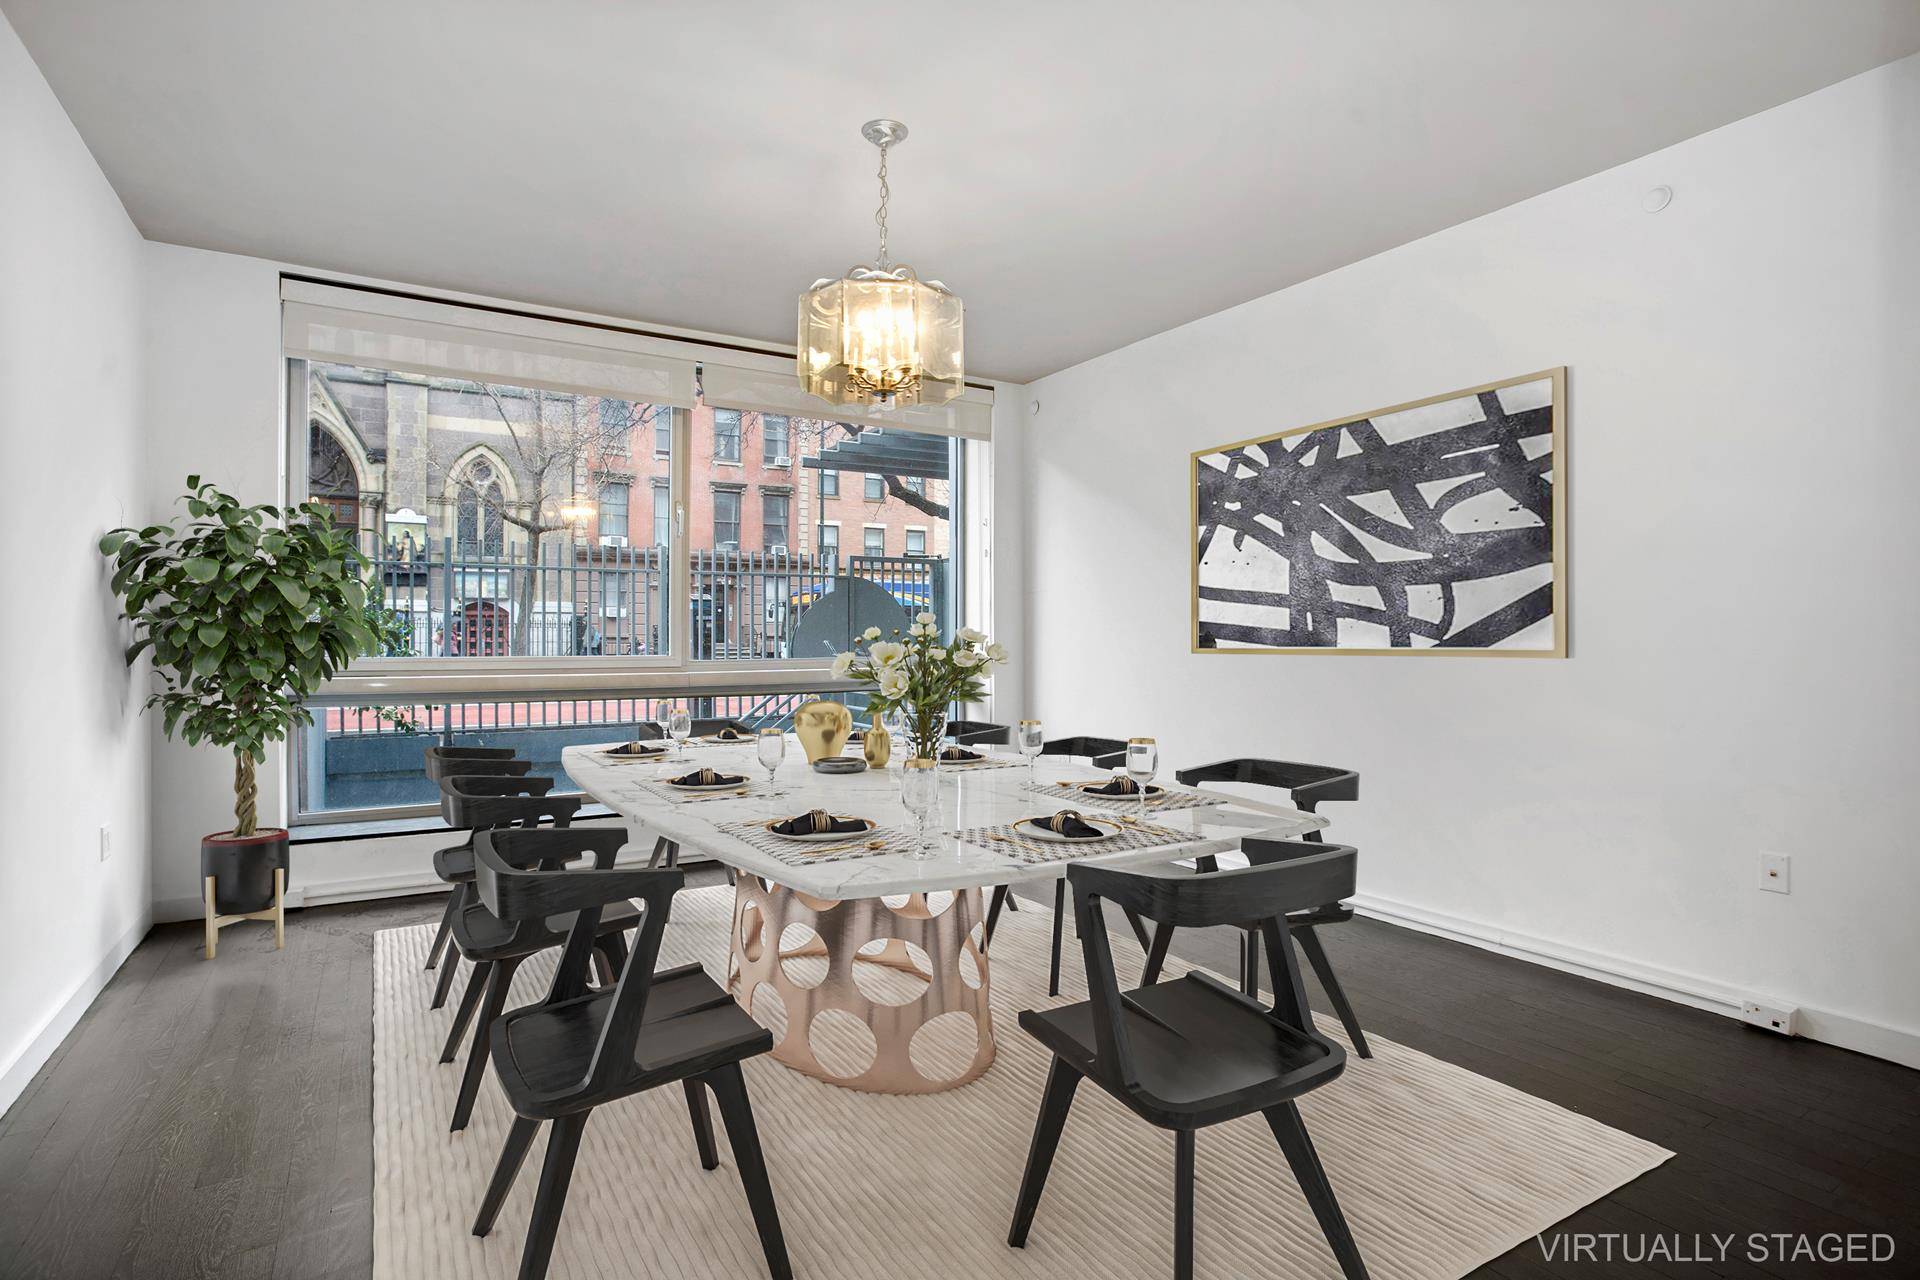 With over 3, 000 square feet of interior living space and an 800 square foot private garden, this spacious and well appointed apartment features a top of the line kitchen ...